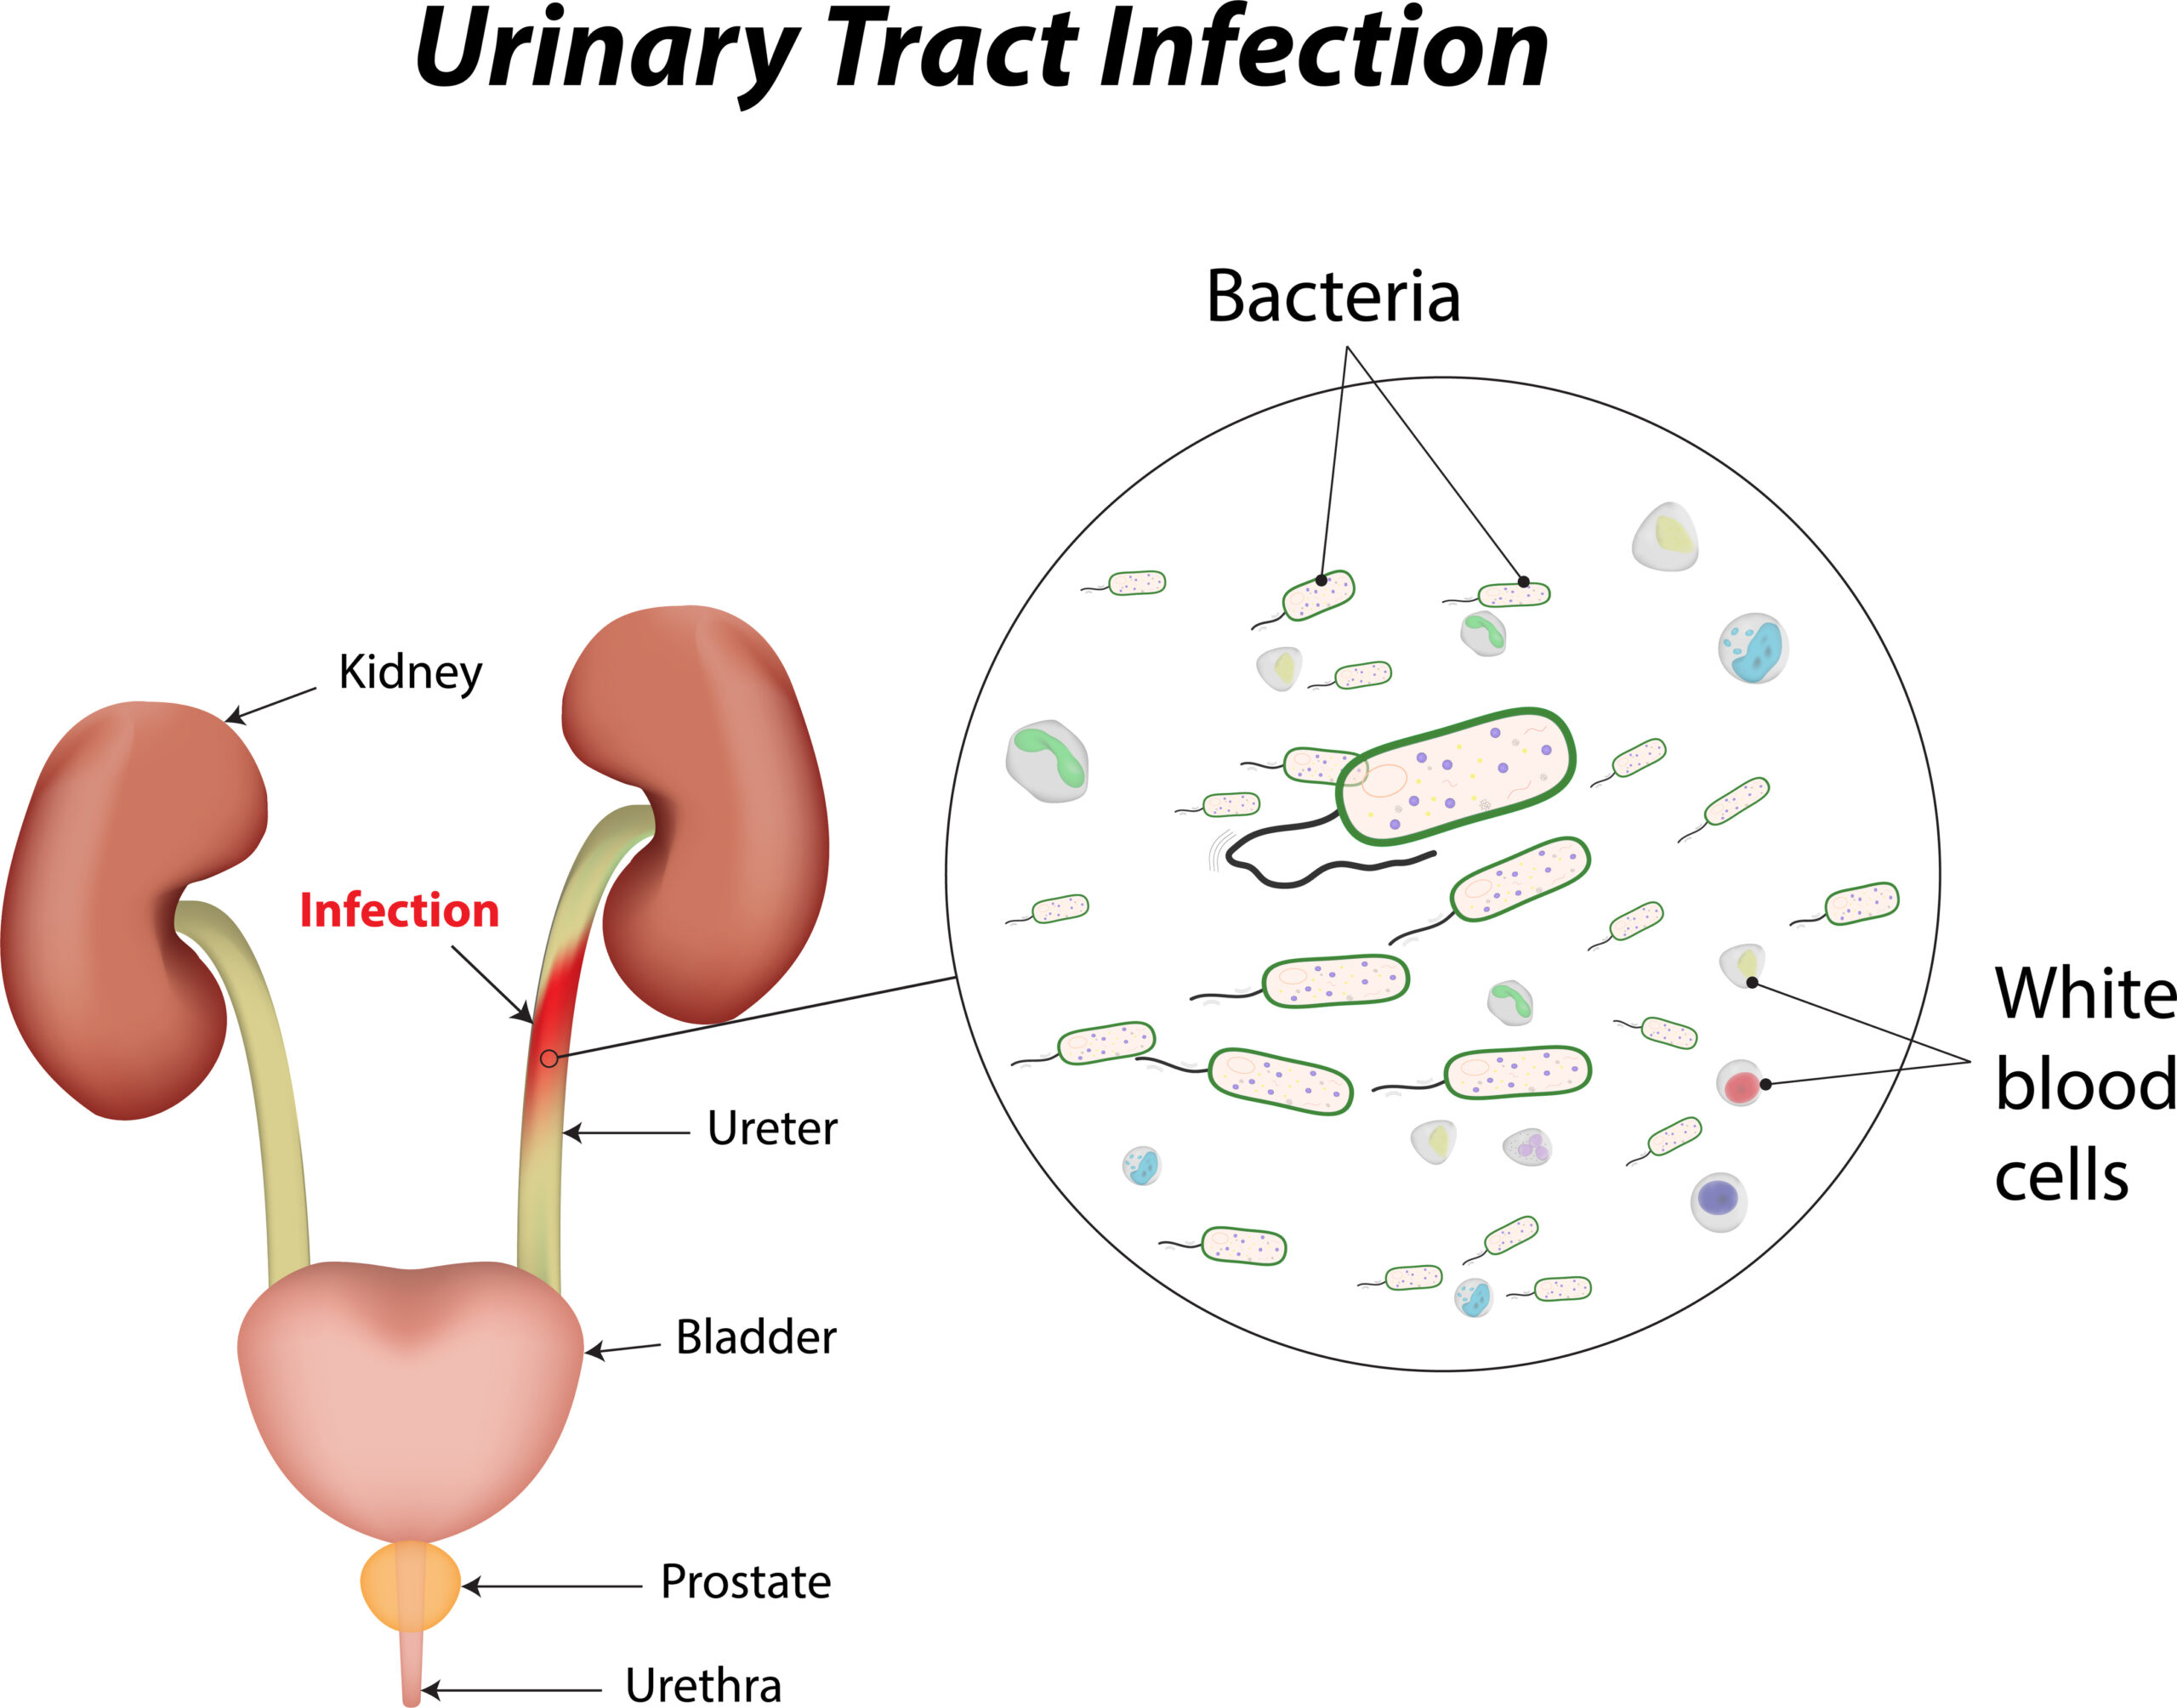 uti, urinary tract infection, bladder infection